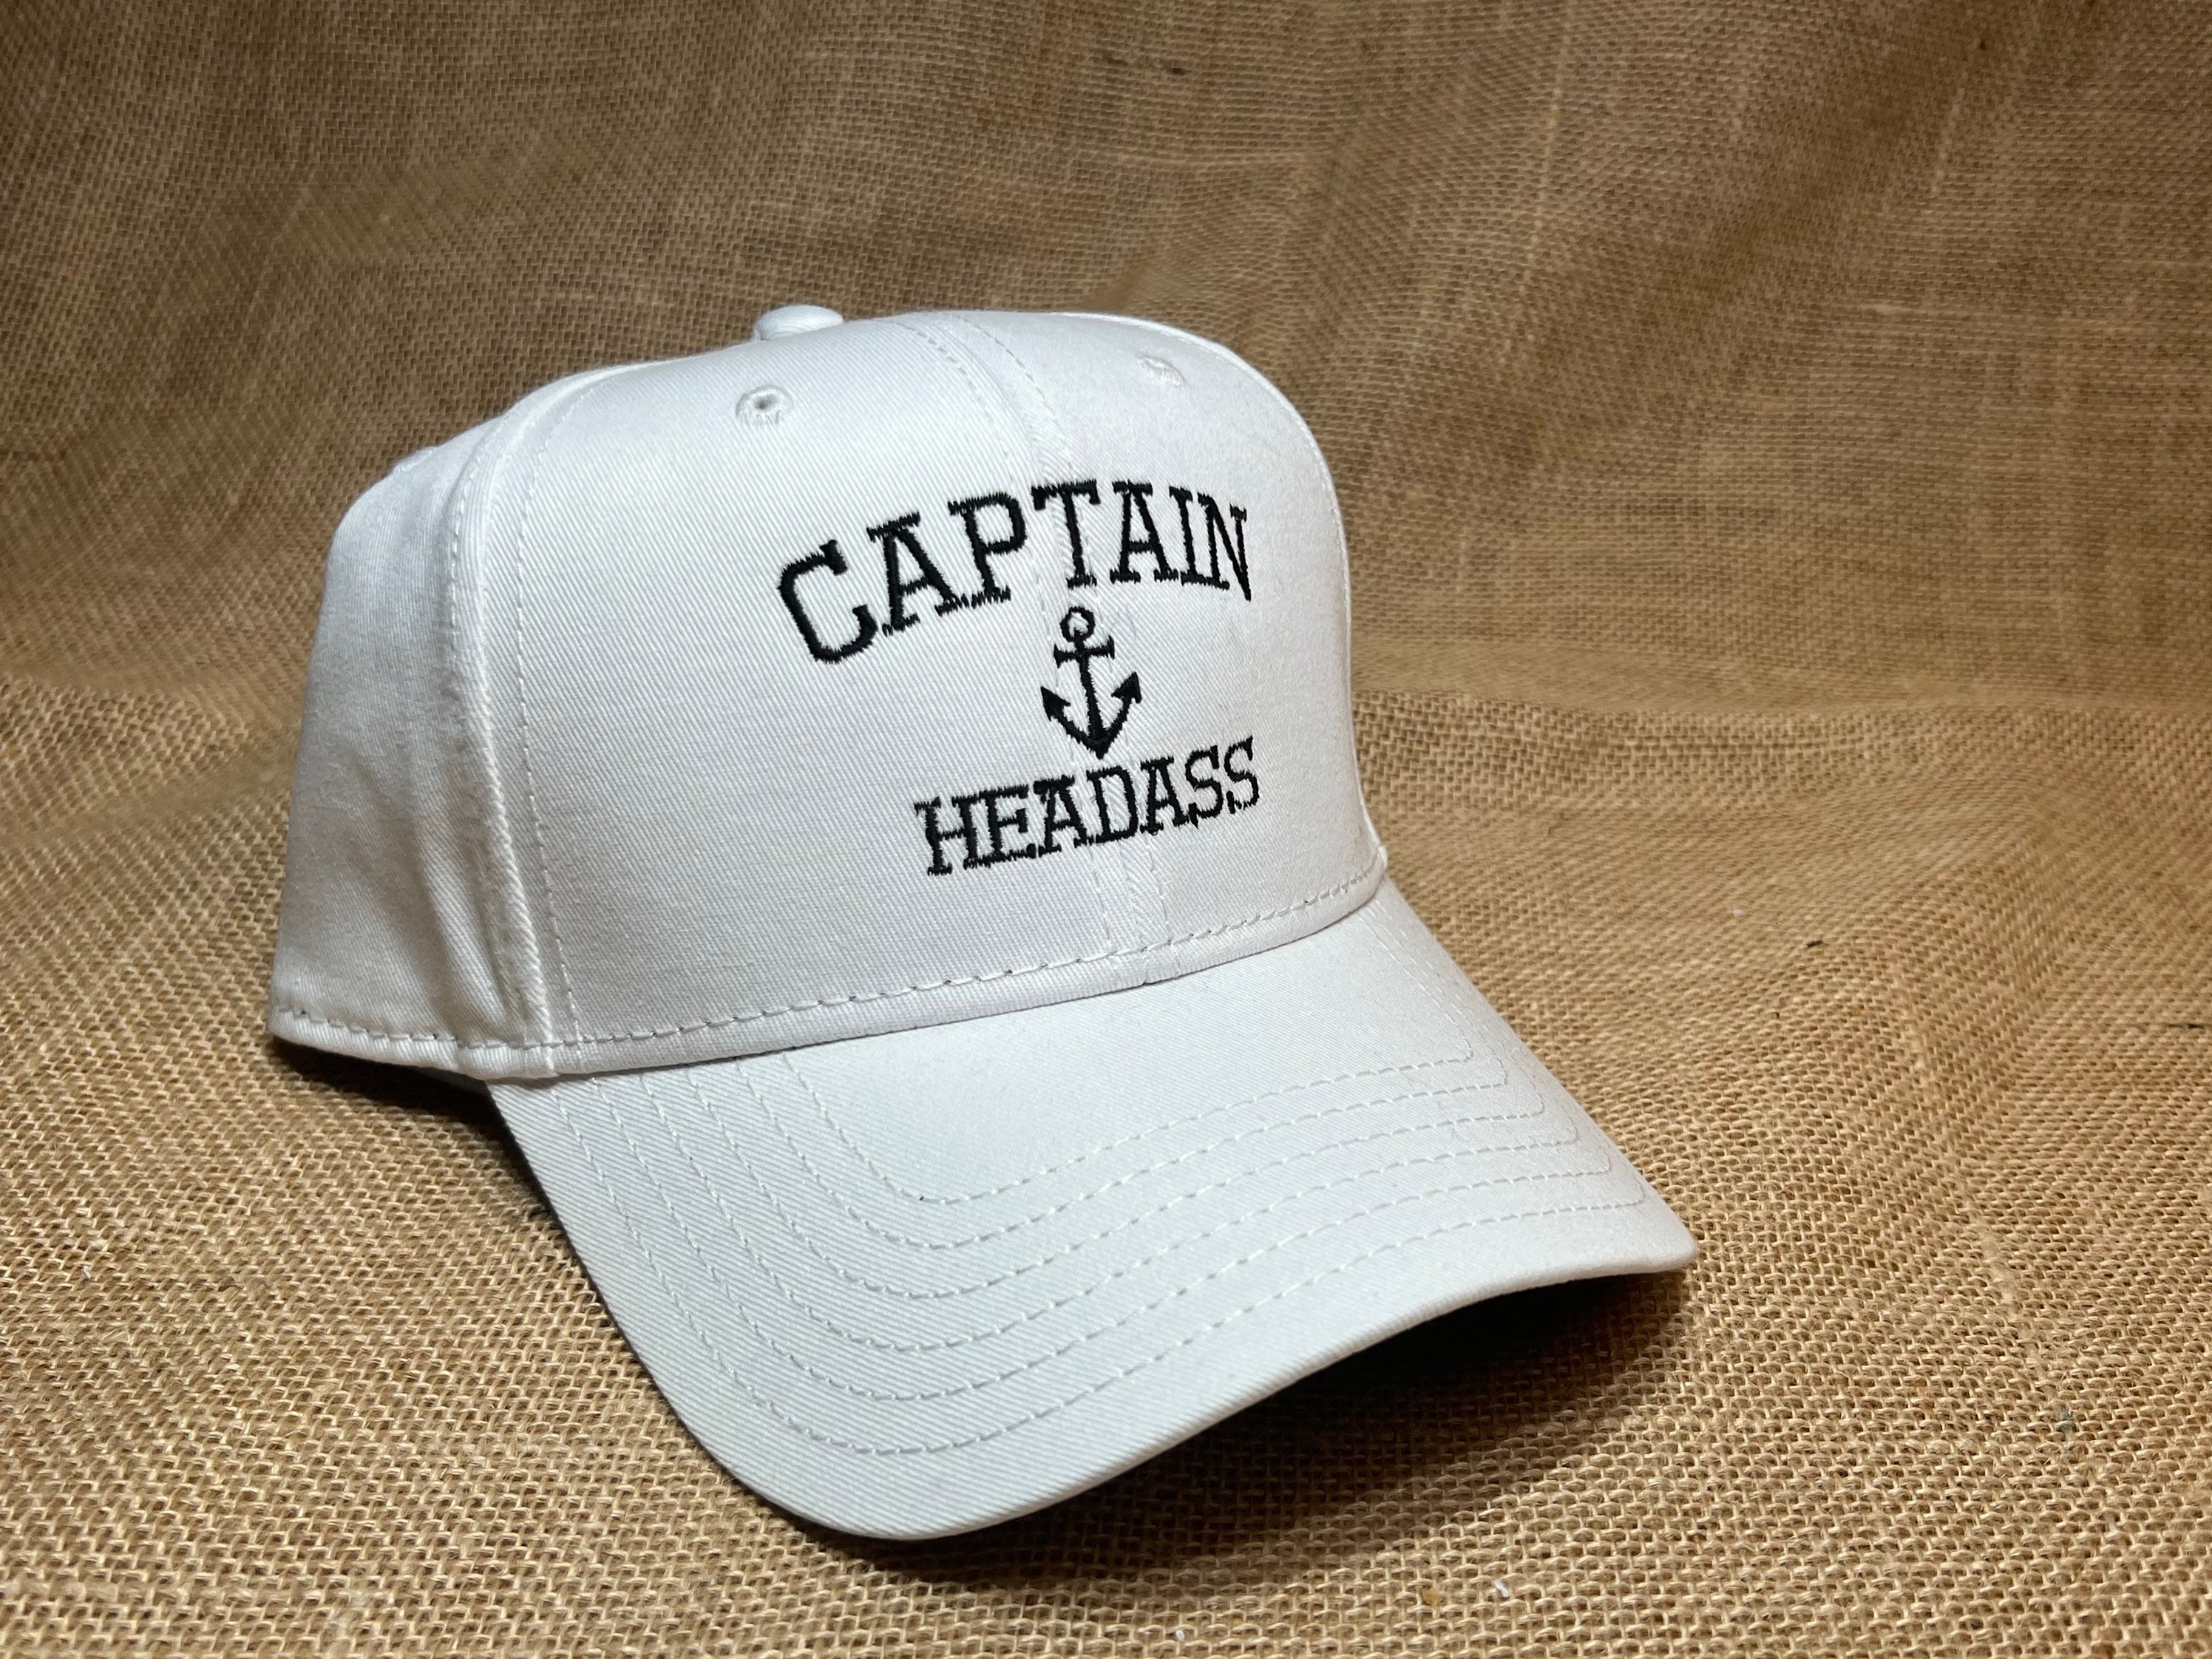 Custom Hats with Logo - Personalized Caps with Name